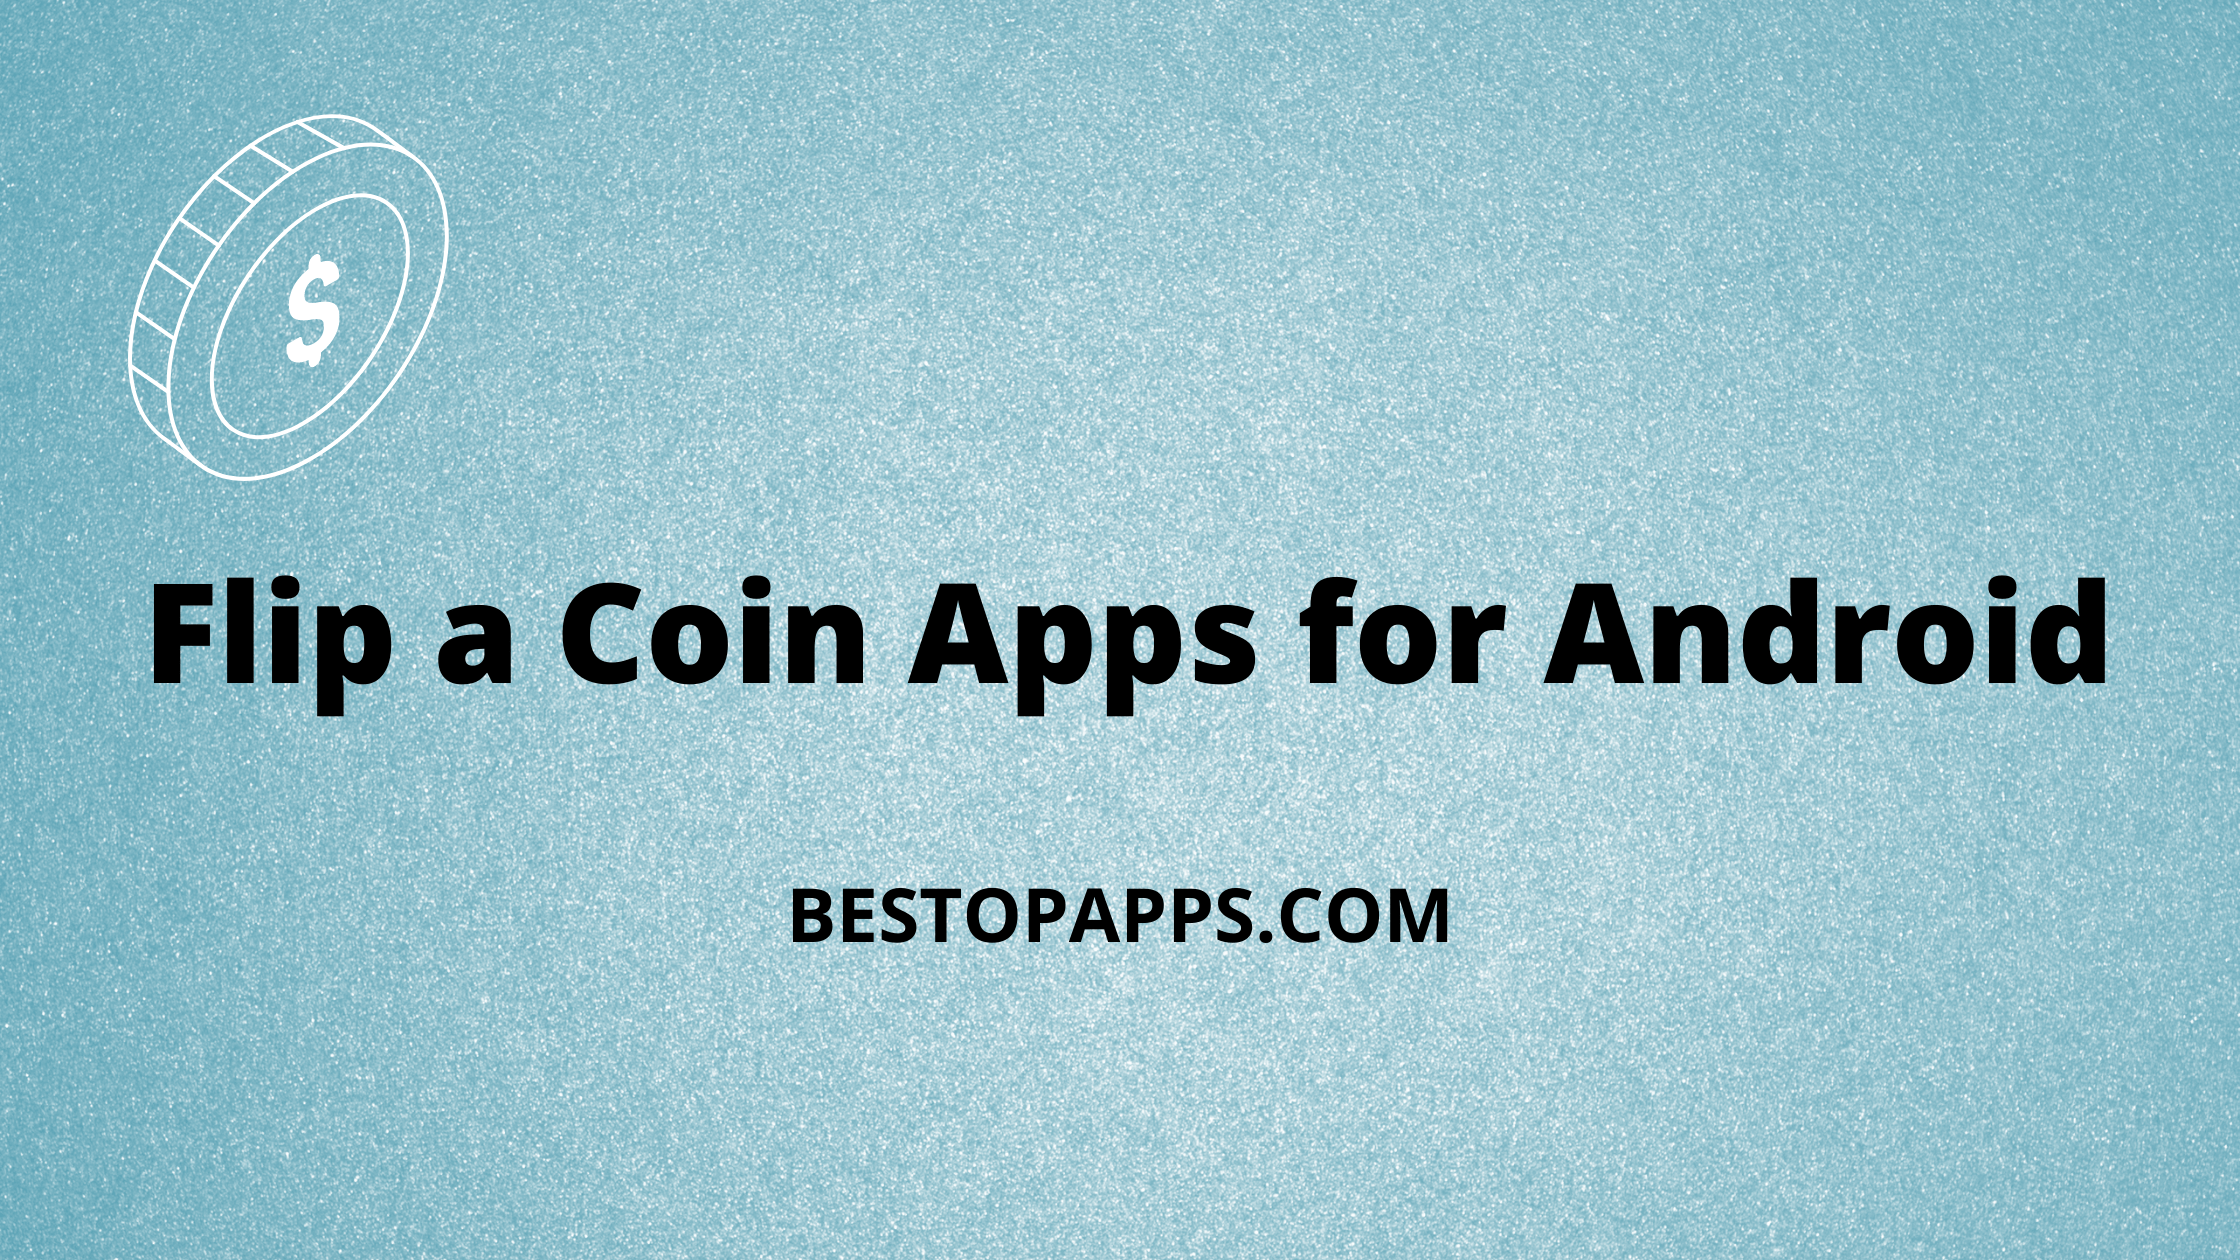 Flip a Coin Apps for Android